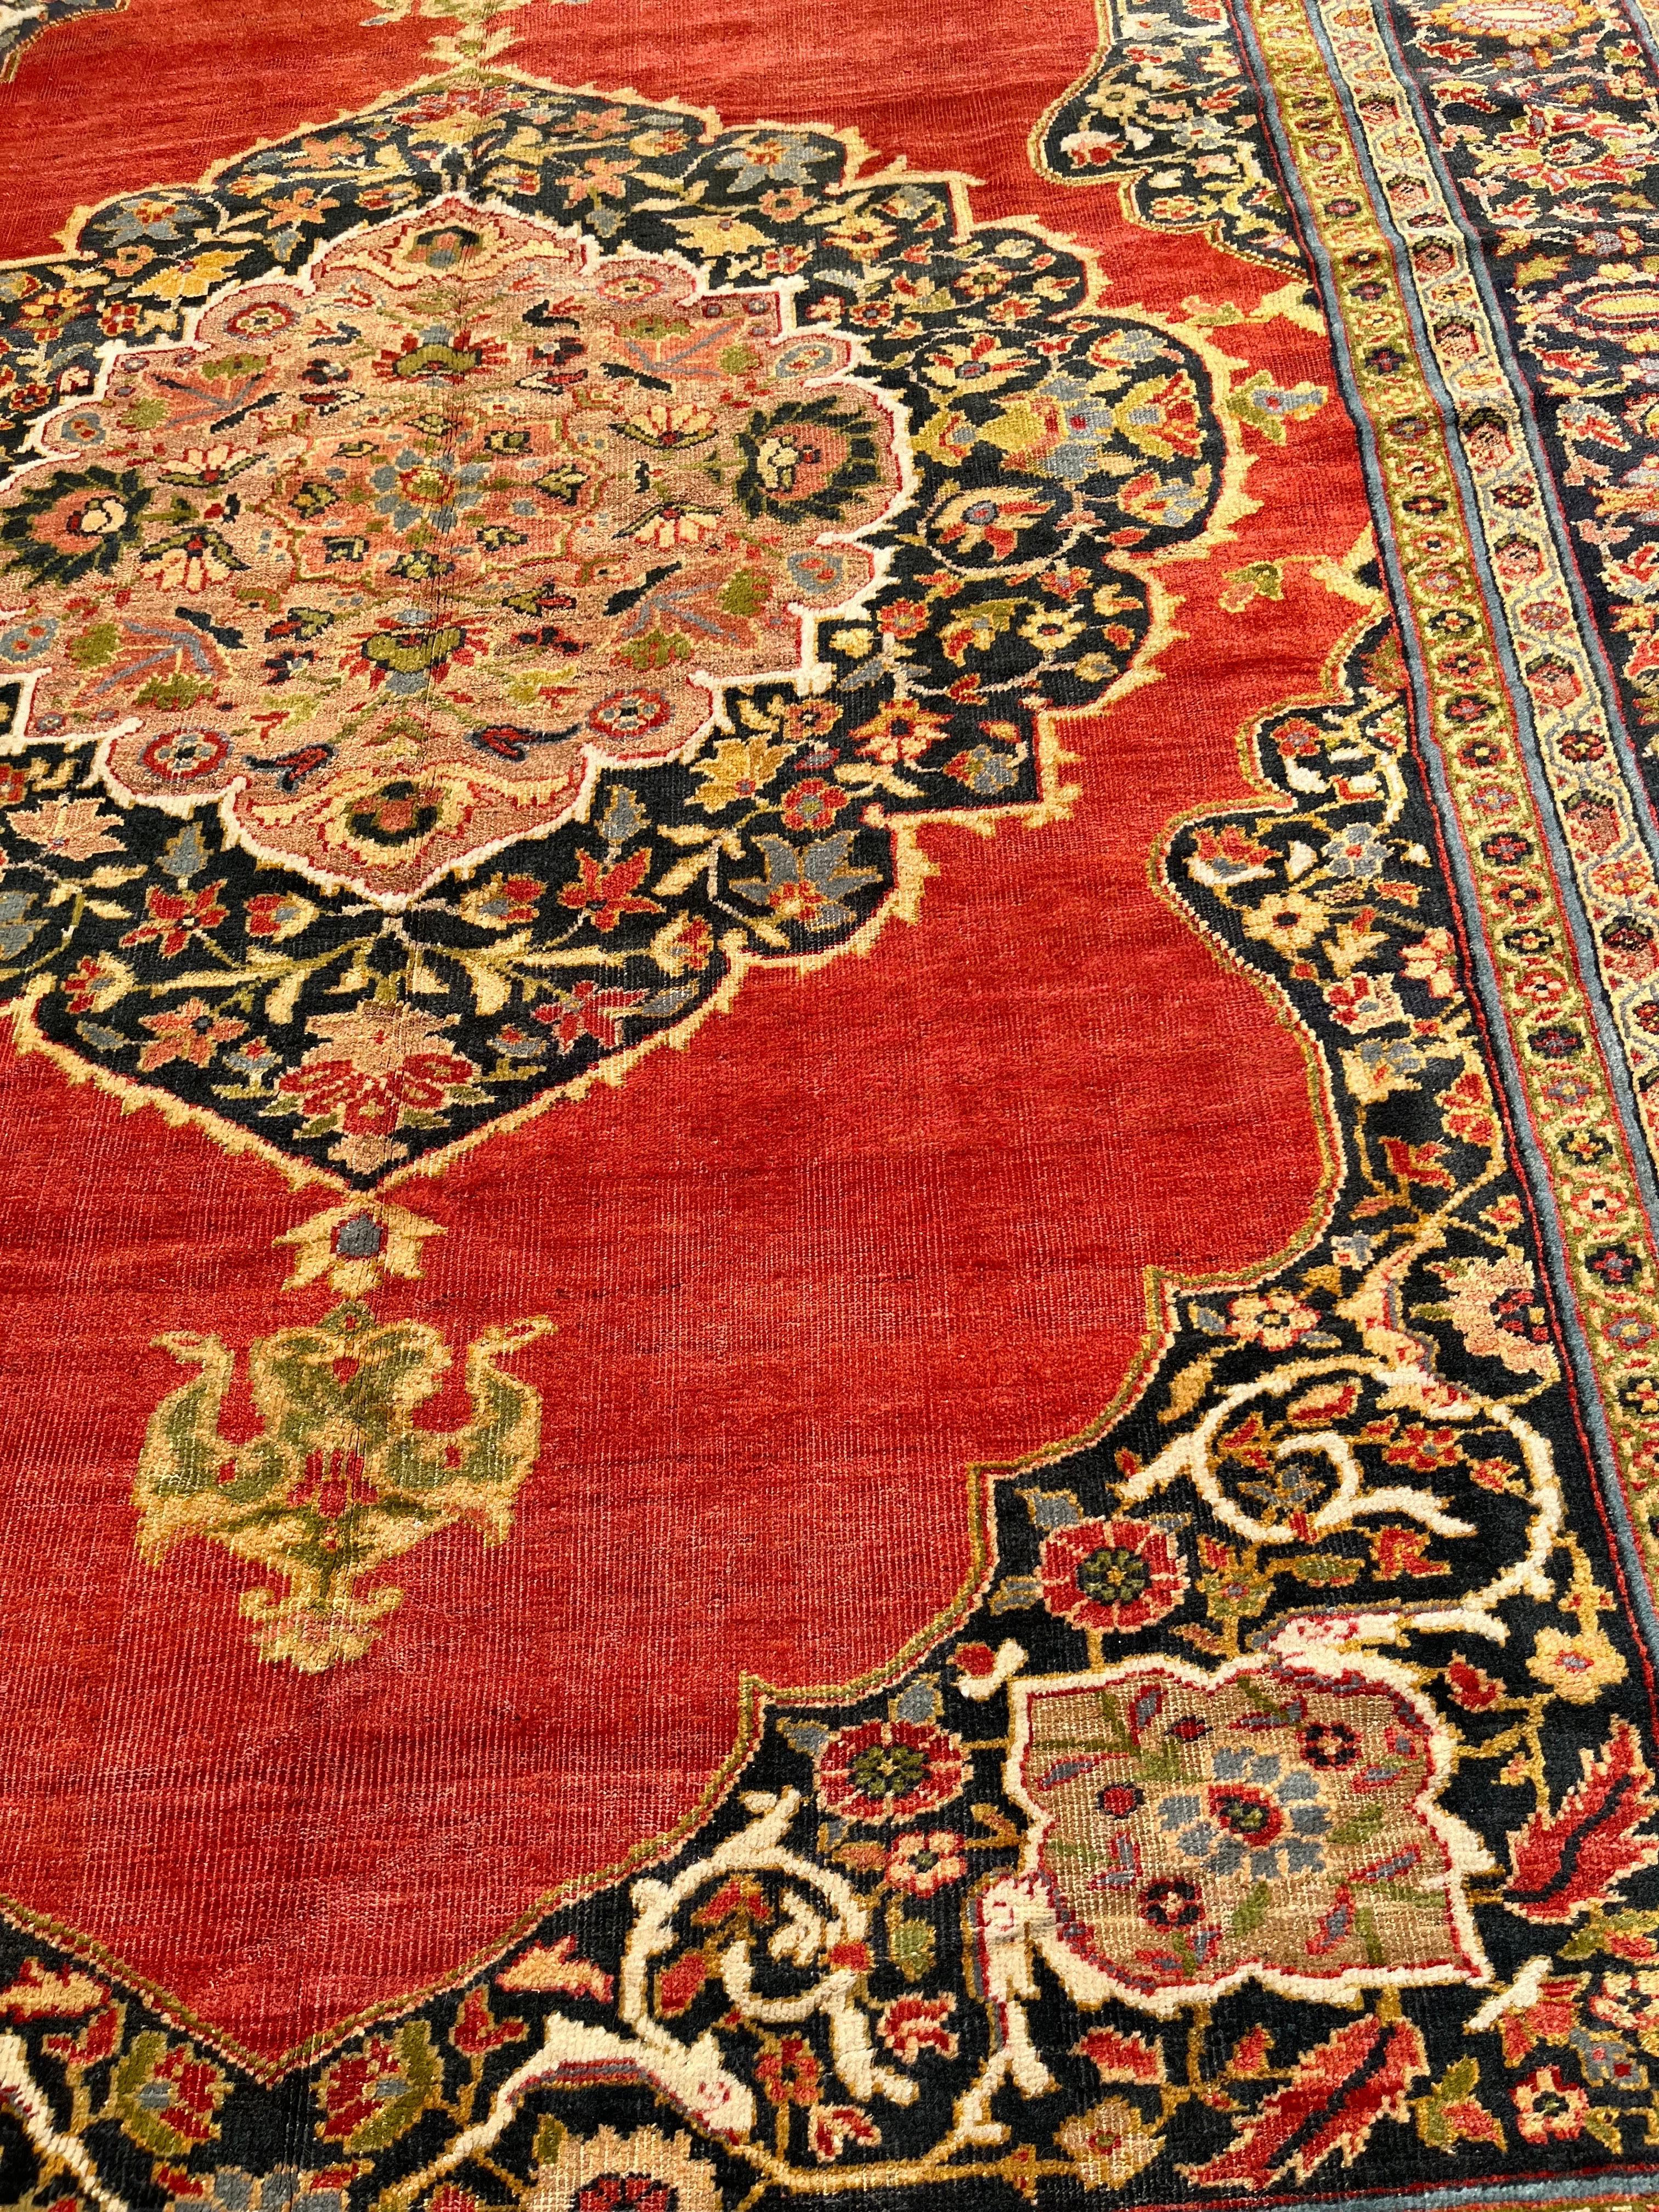 This striking and rare Sultanabad was woven in the 1880's and has an elegance about it. The beautiful design and harmony of vegetable dyes create a gorgeous carpet. It is in wonderful condition with less than 1% of scattered repiling. A great